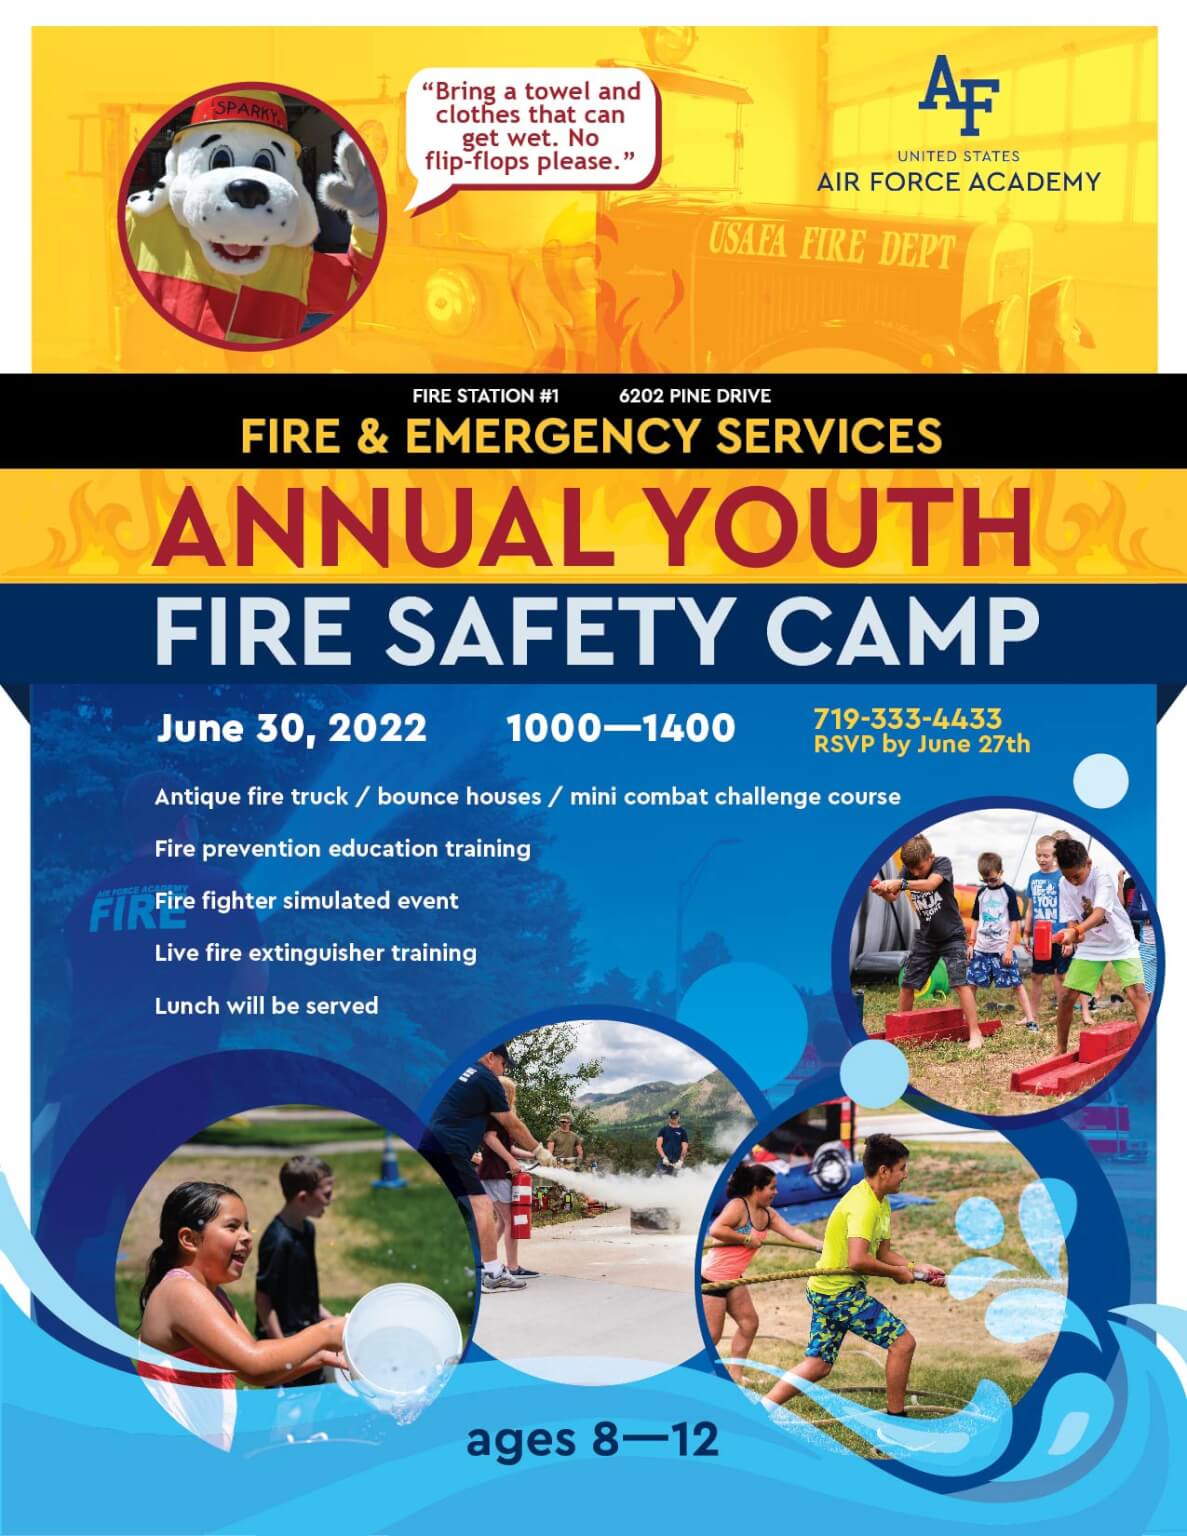 Advertisement for Fire Safety Camp